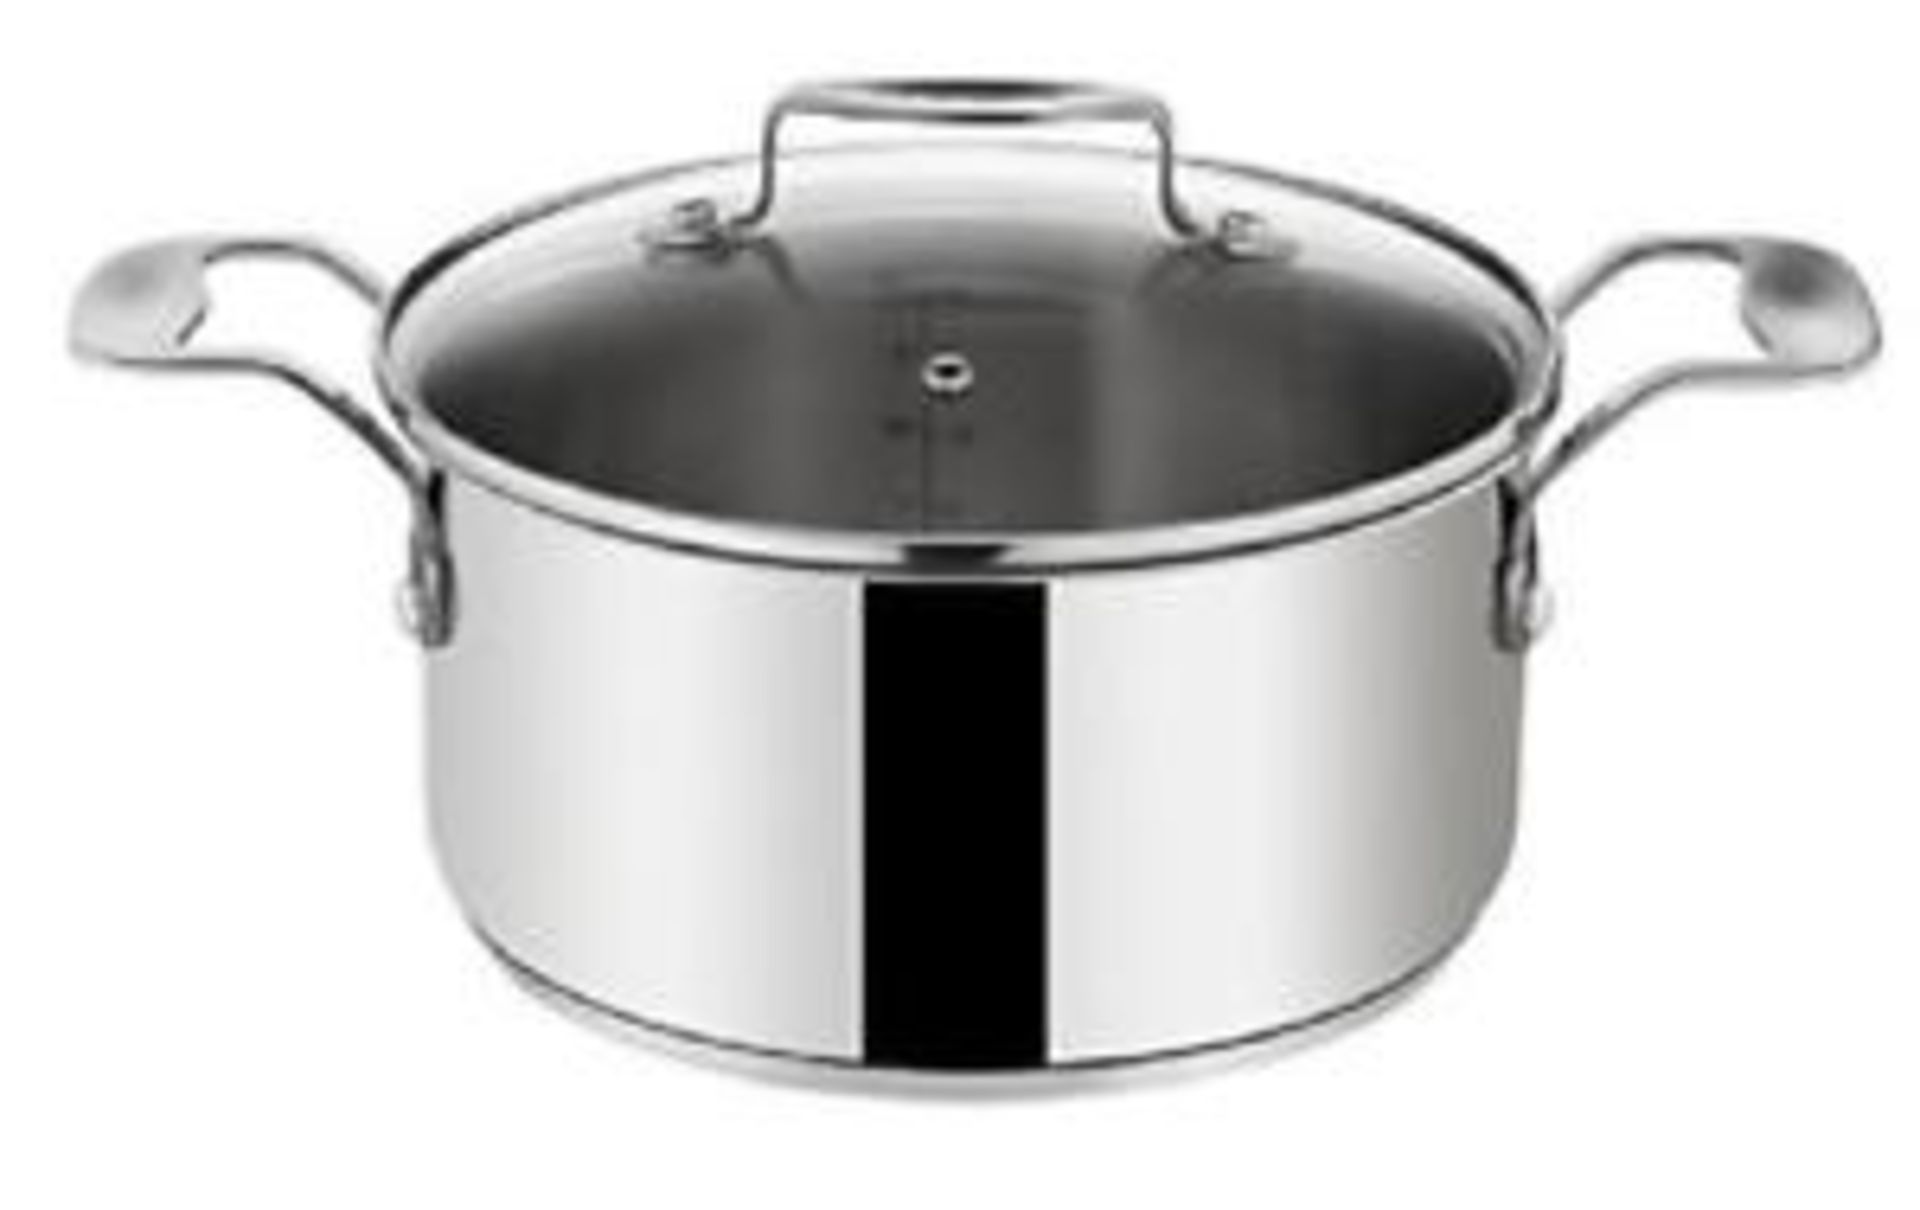 V Brand New Tefal Jamie Oliver Professional 6.7 Litre Stainless Steel Induction Cooking Pot With